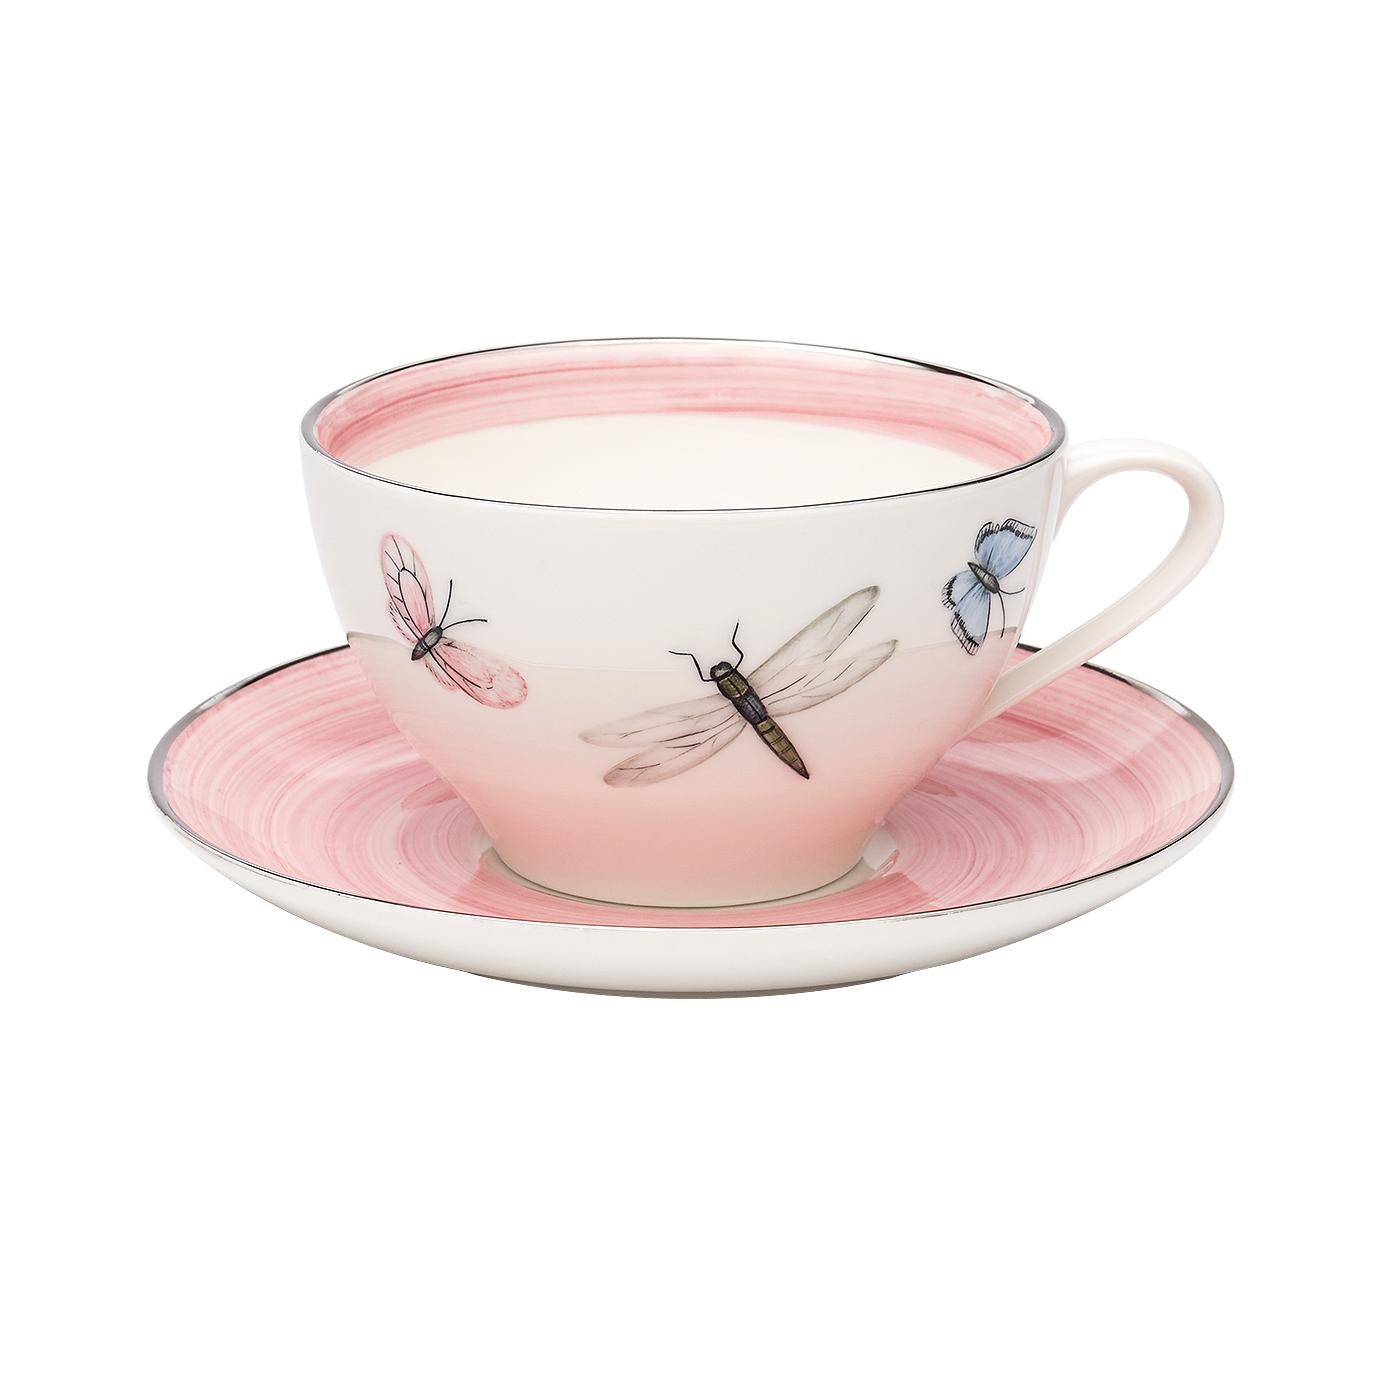 These completely handmade porcelain cups with saucers are painted by hand with a charming hands-free modern decor. The set comes as a set of six hand painted cups with a butterfly decor all-around and rimmed in three different colors. Rimmed by hand